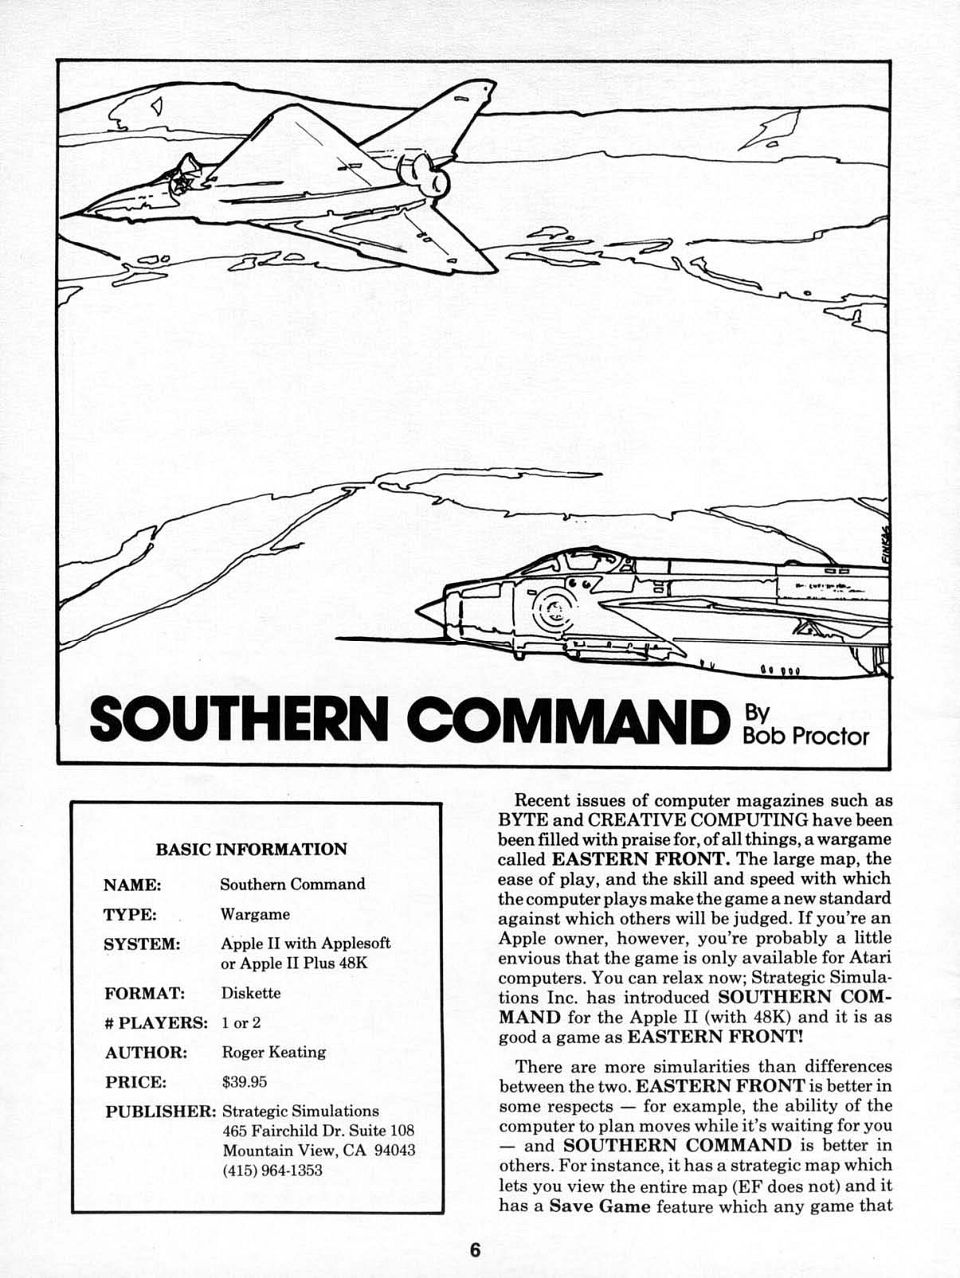 Southern Command